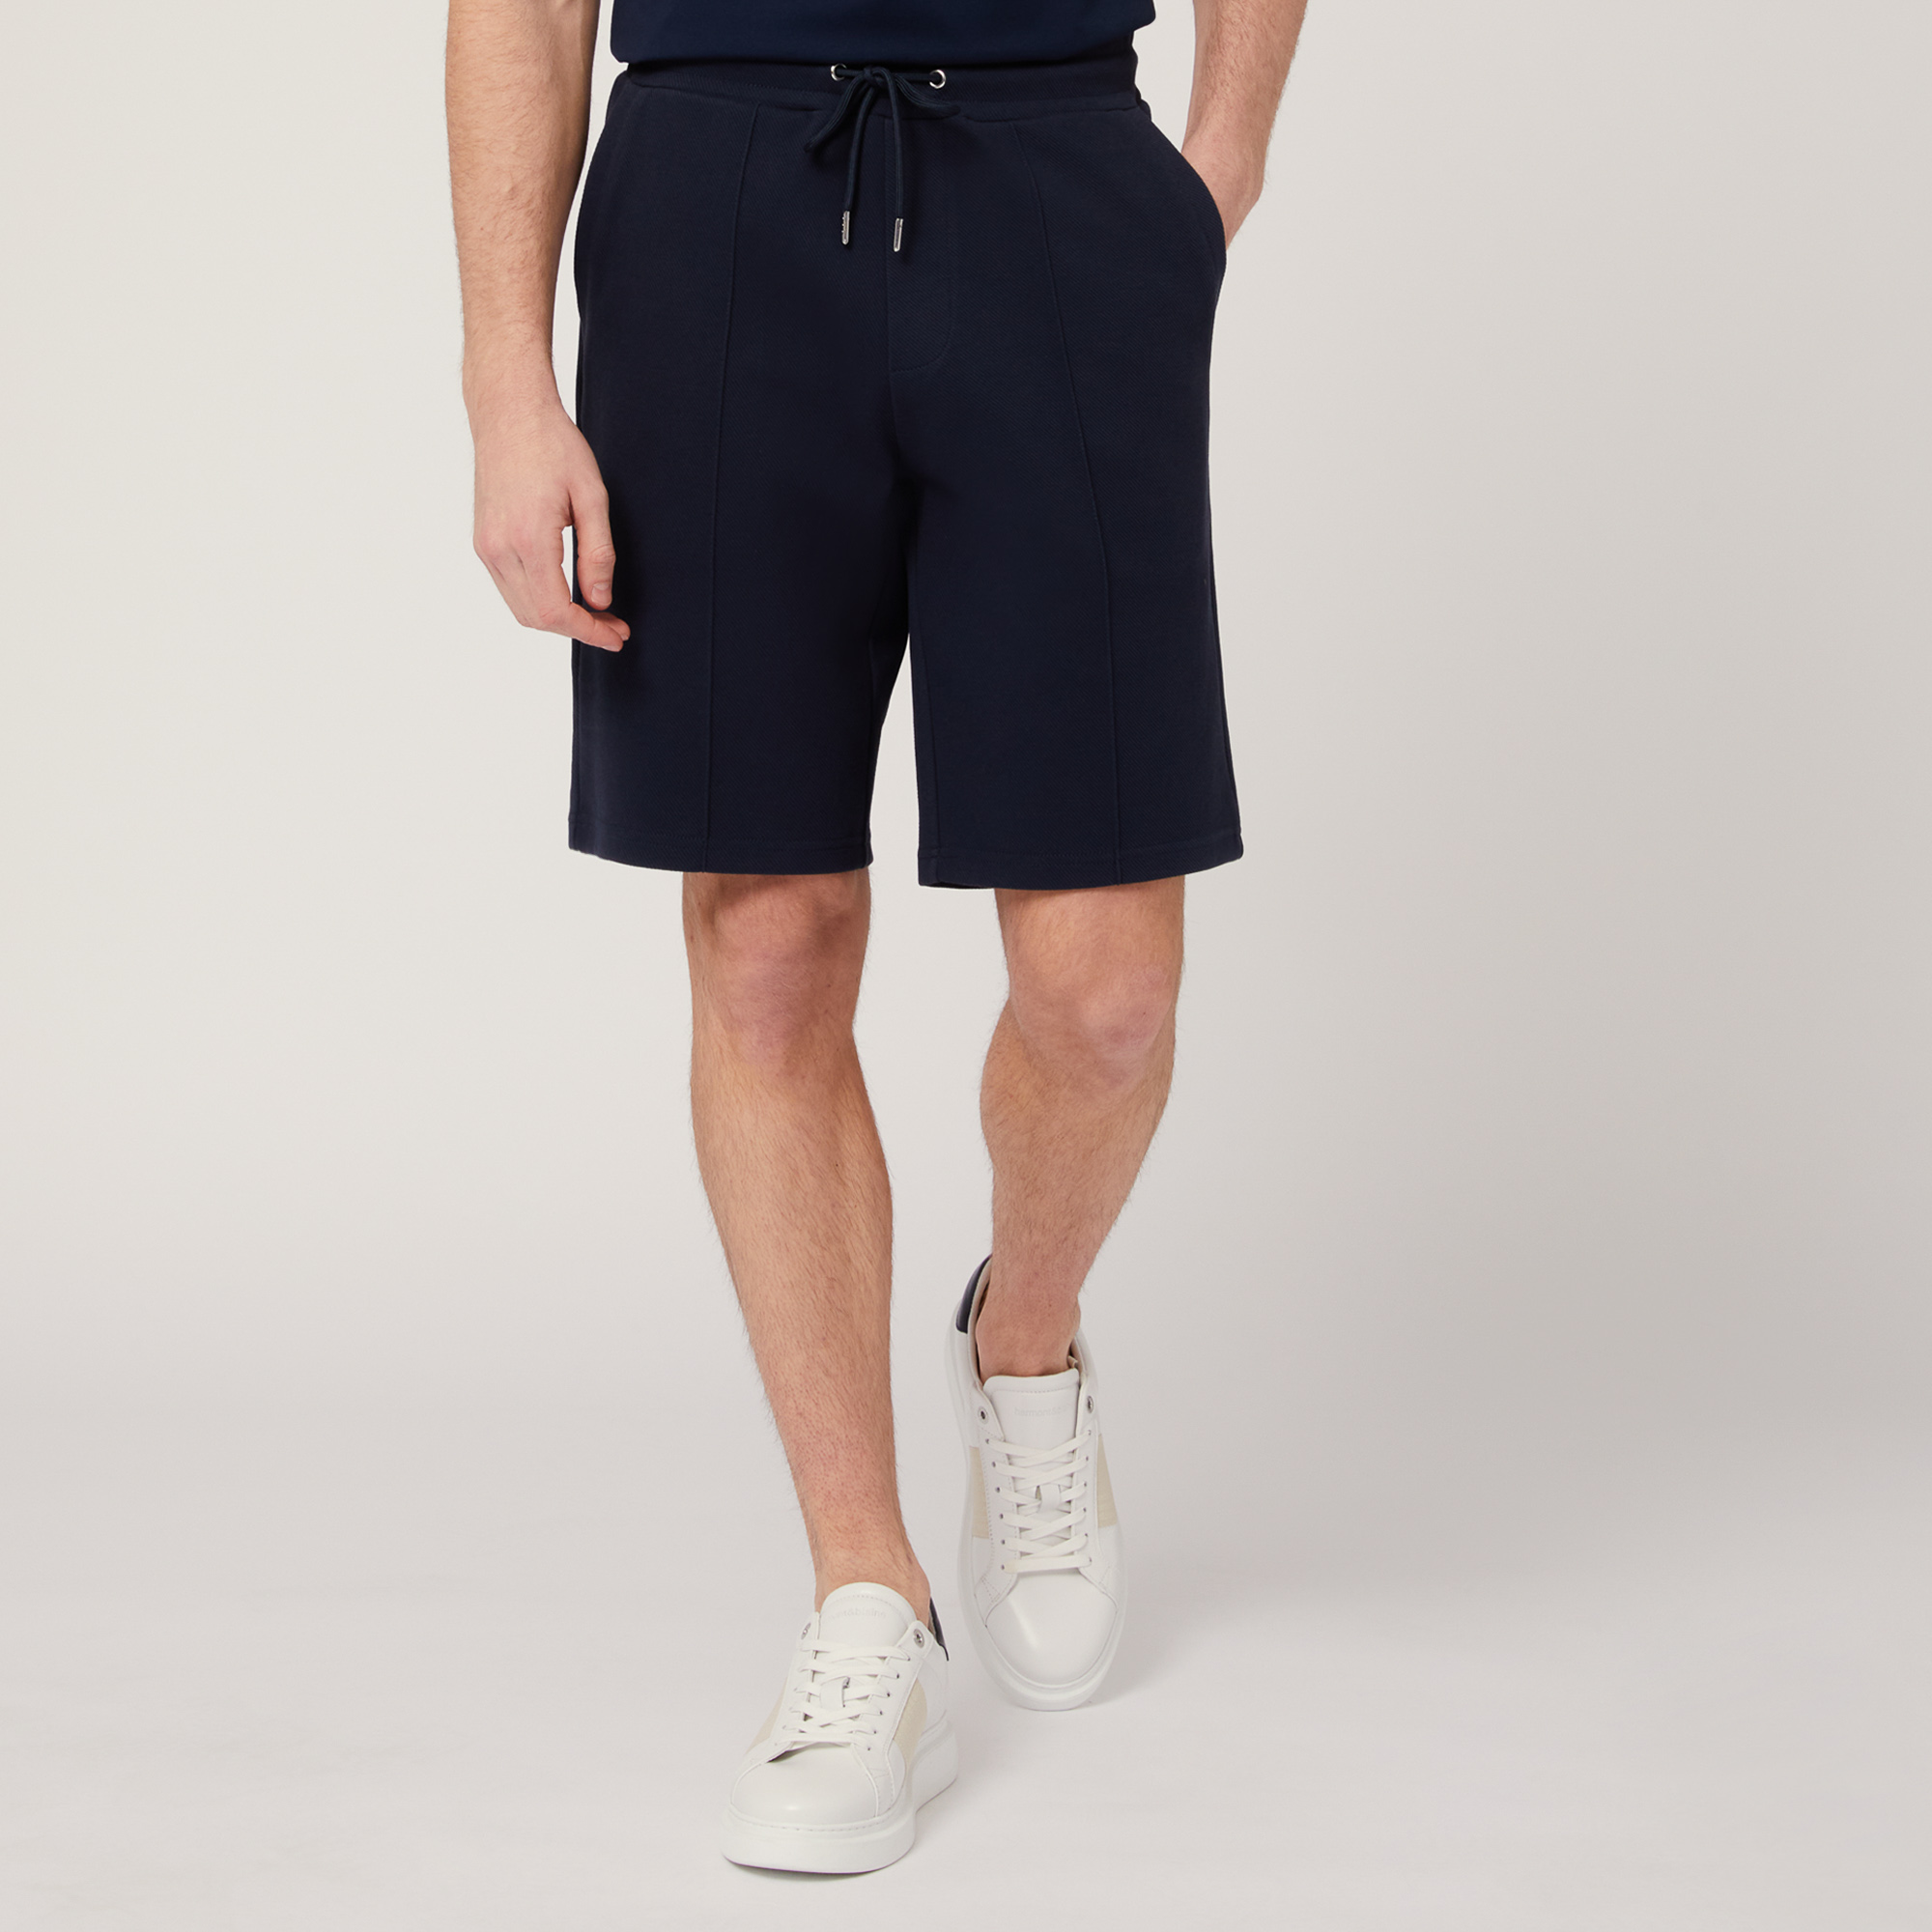 Shorts In Cotone Stretch Con Tasca Posteriore, Blu Navy, large